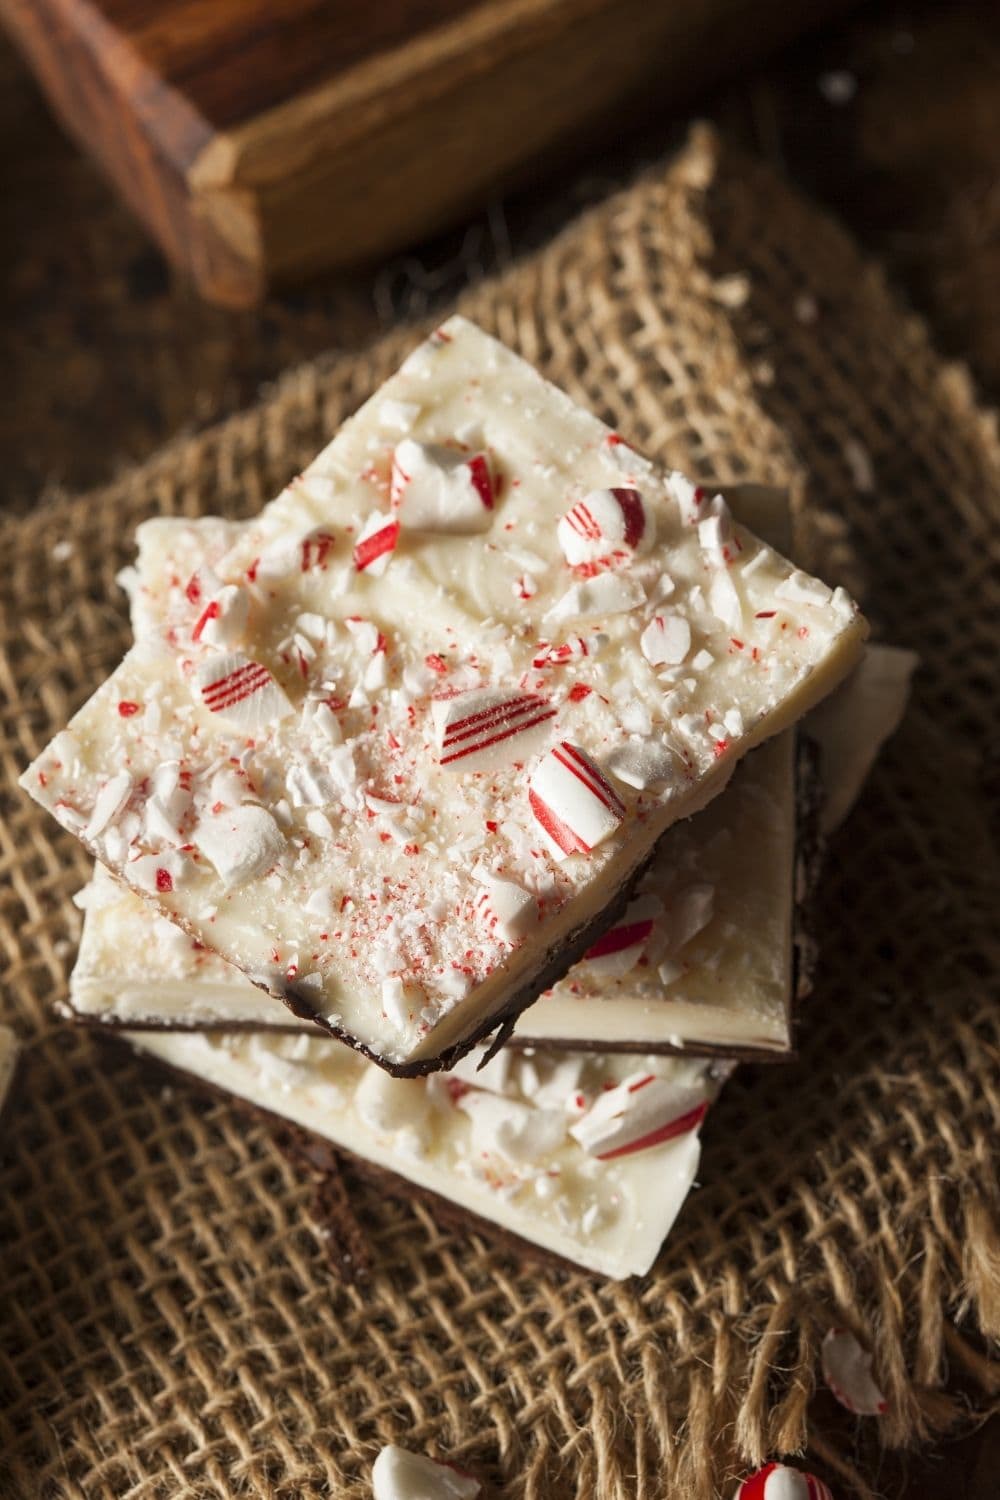 Slices of chocolate peppermint bark with crushed candies.